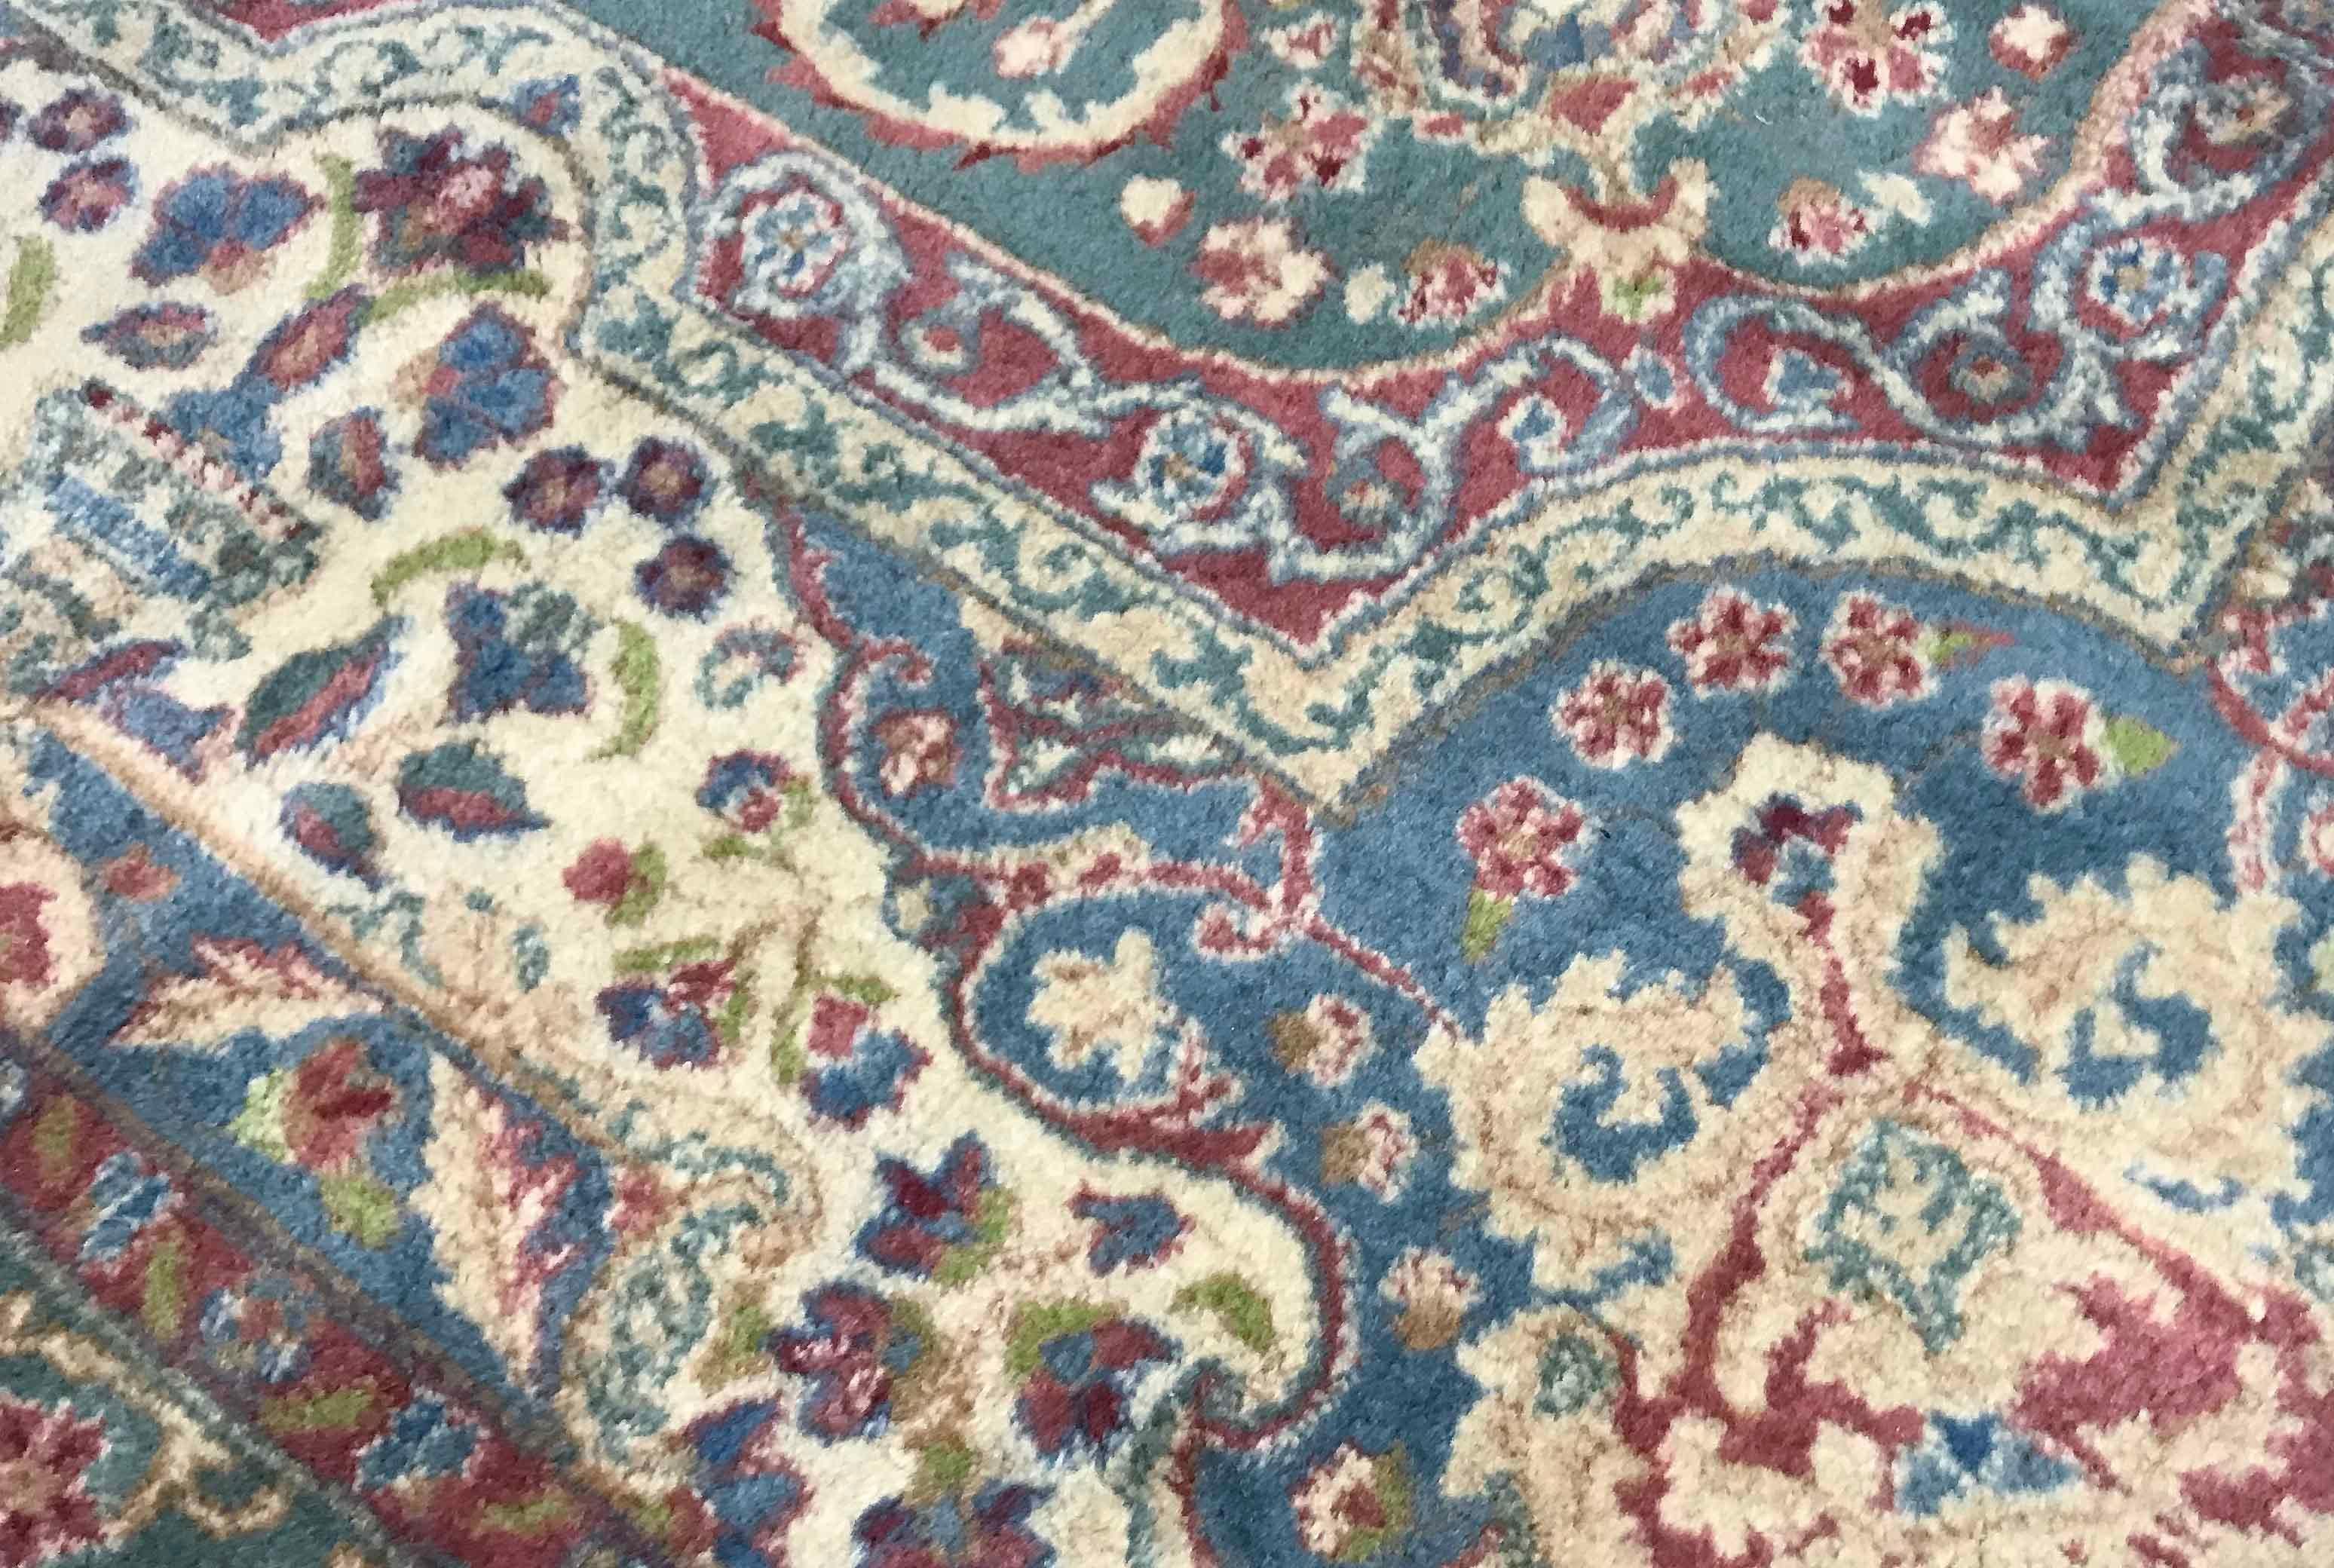 Vintage Persian Kerman, circa 1940. A Kerman rug with a soft blue ground having a light multicolored central design repeated in the borders this rug will create a sense of style and character to any area it is placed. Size: 8'3 x 10'5.